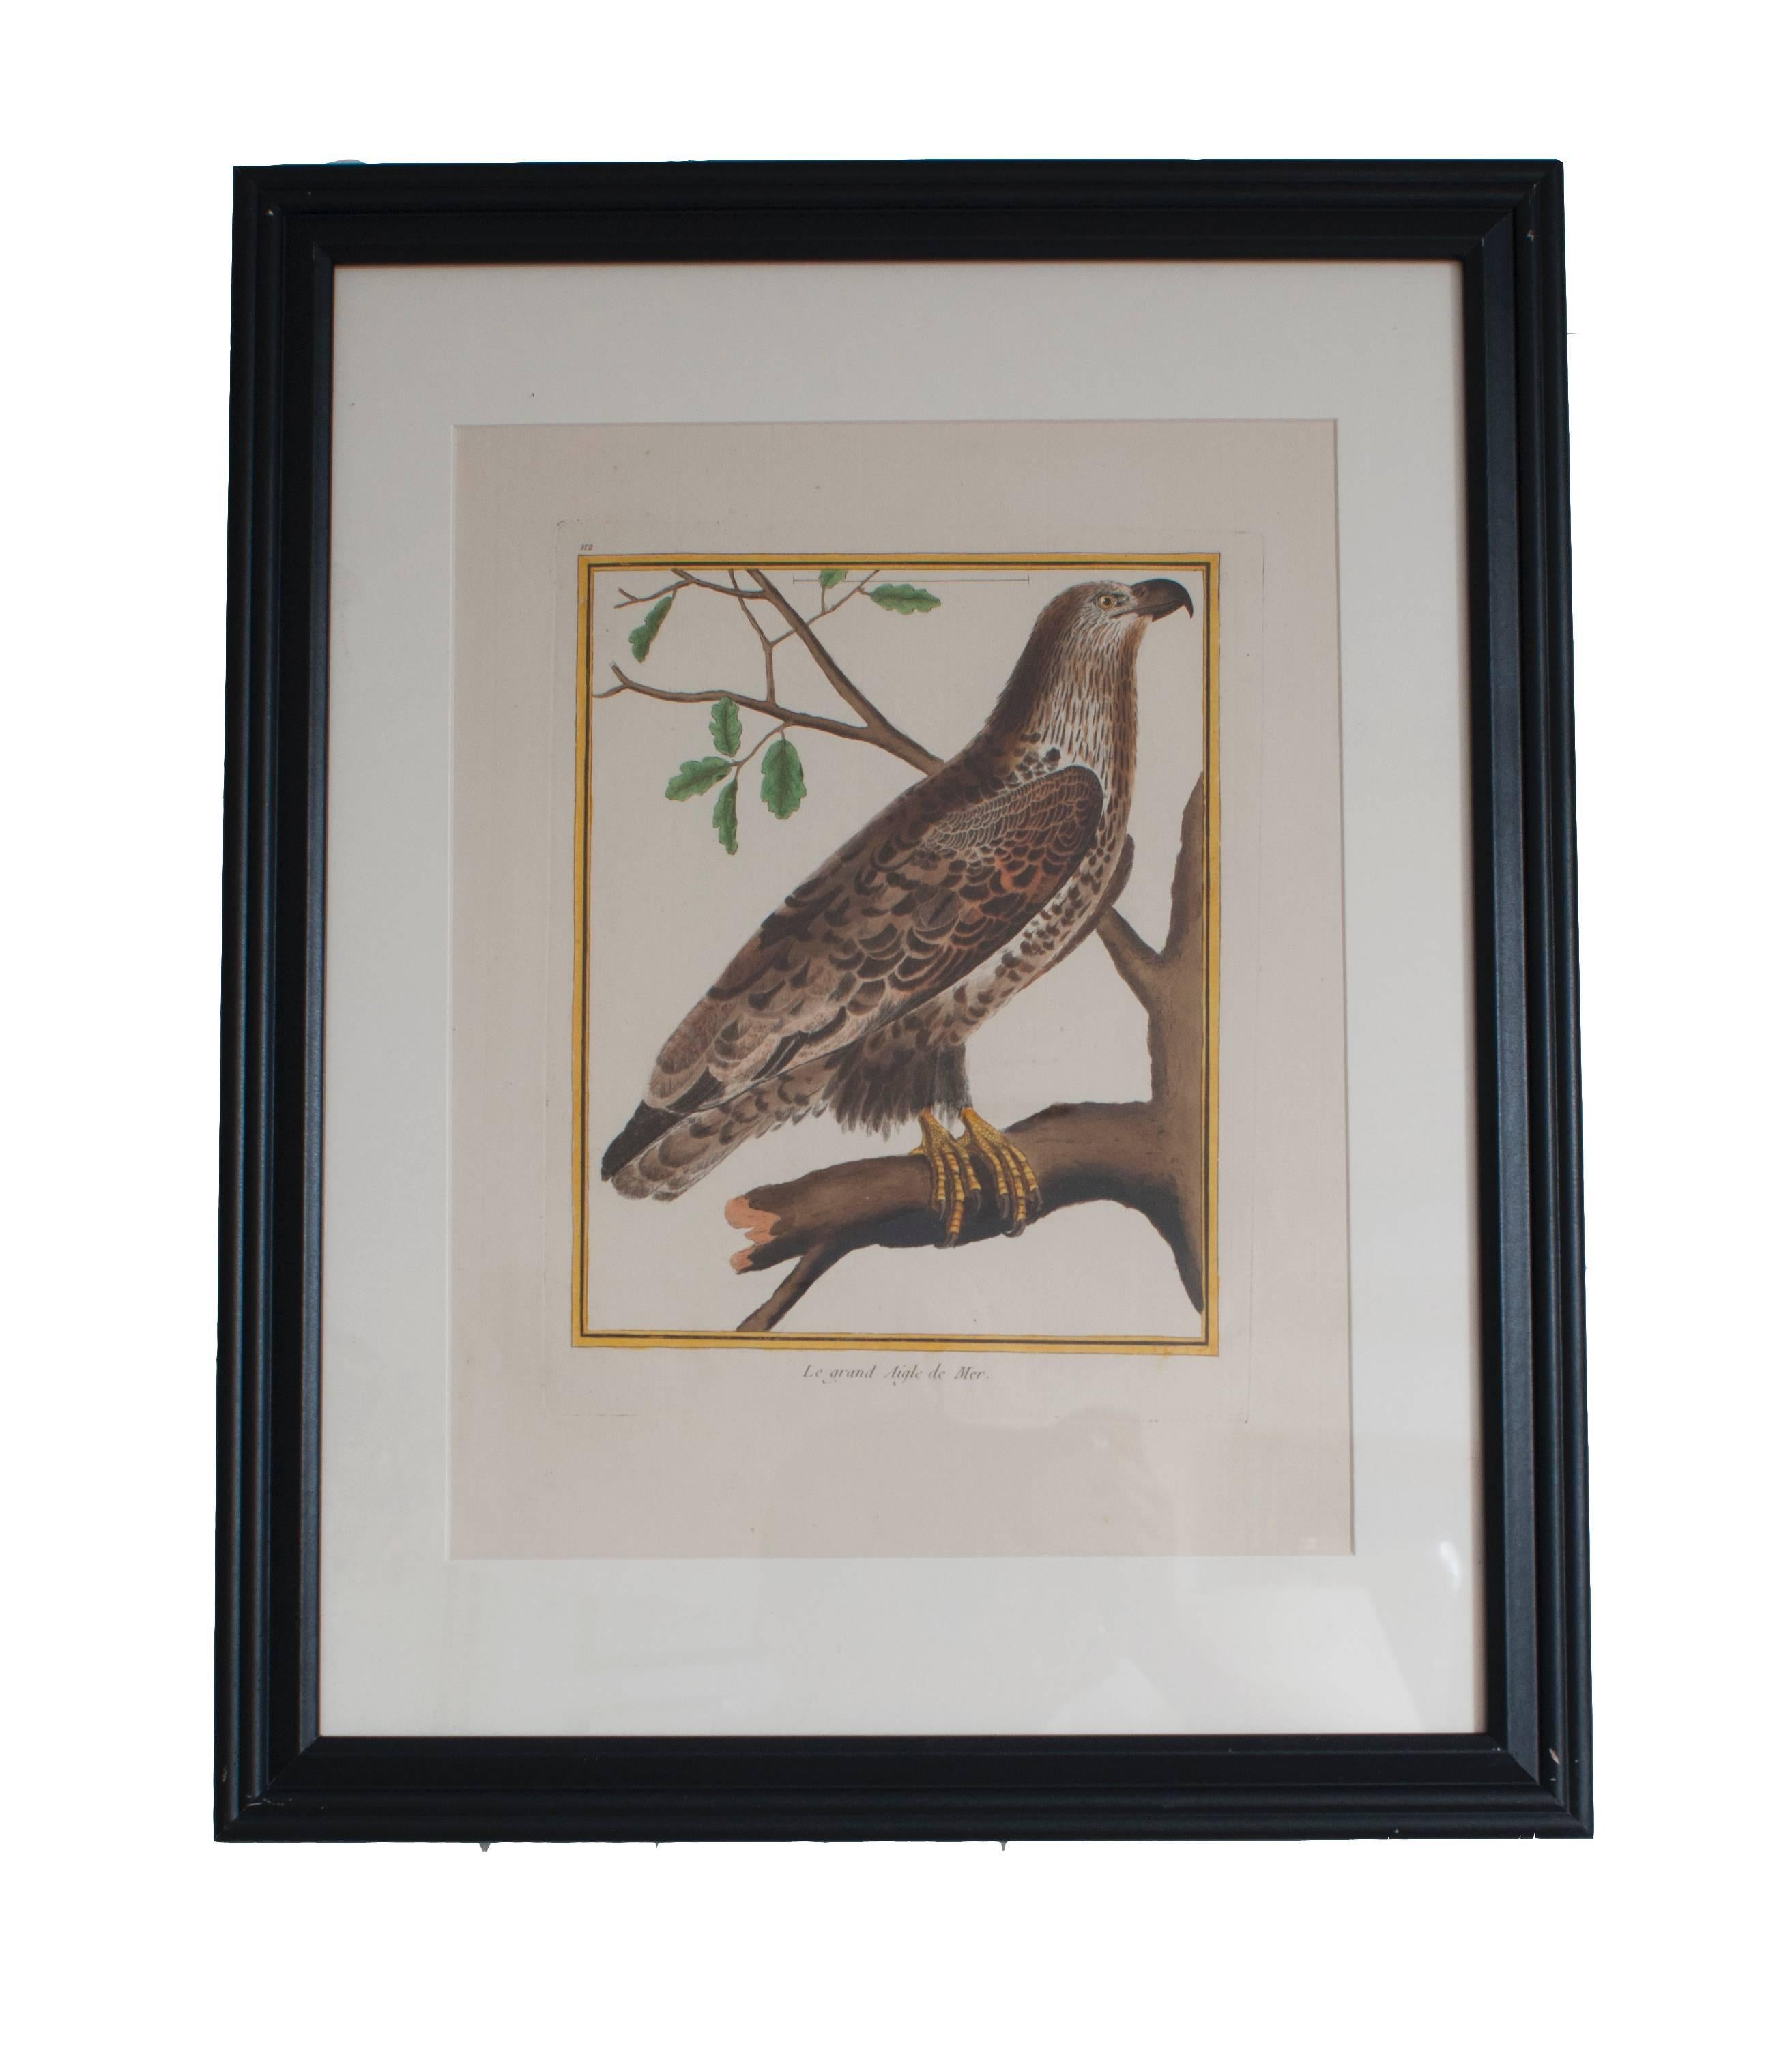 Hand-Painted Six Hand Colored Engravings of Birds in New Frames & Matting. By Martinet. For Sale